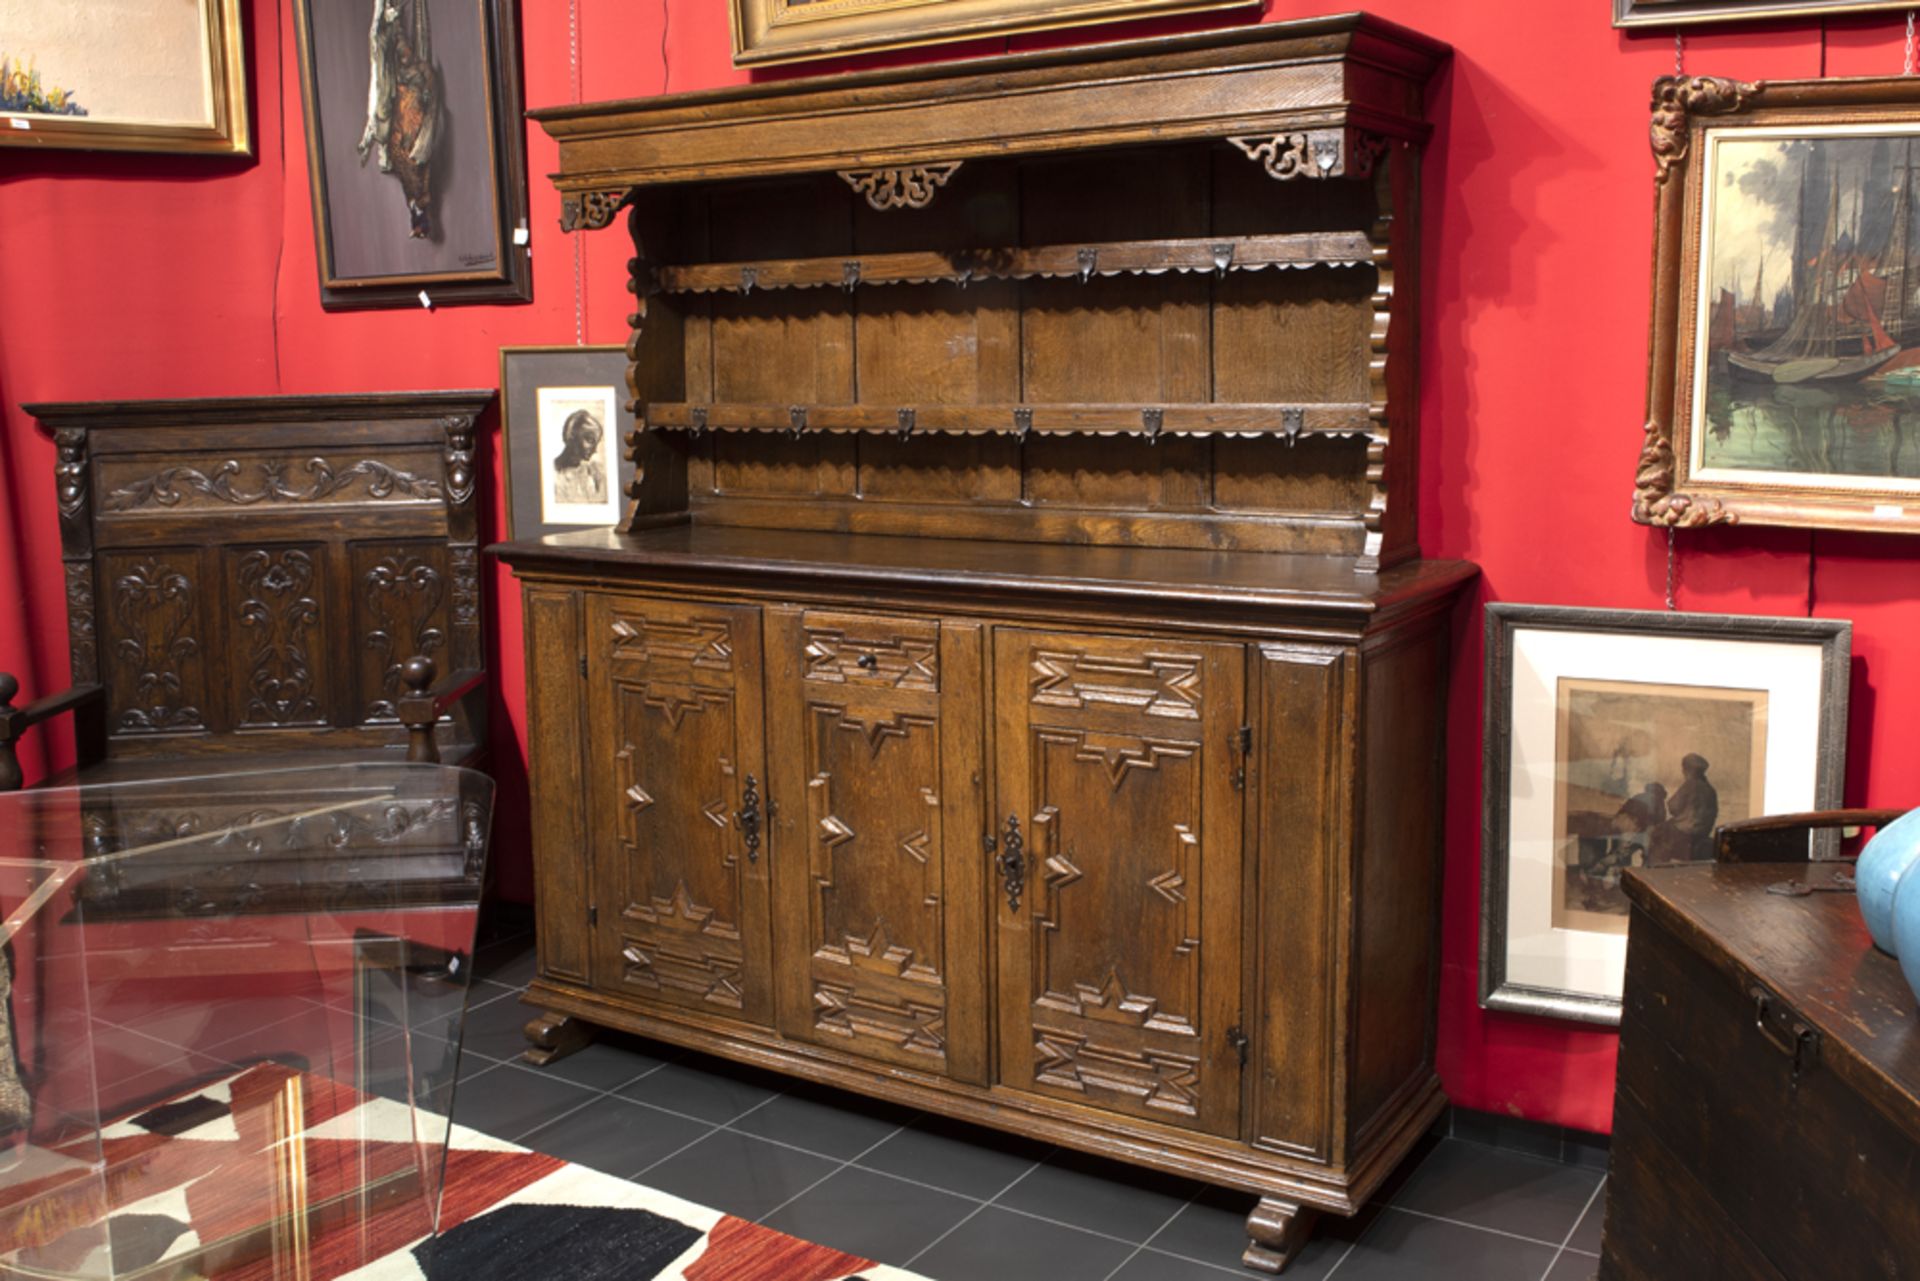 18th Cent. German oak dresser-board with certificate and invoice||Achttiende eeuwse Duitse